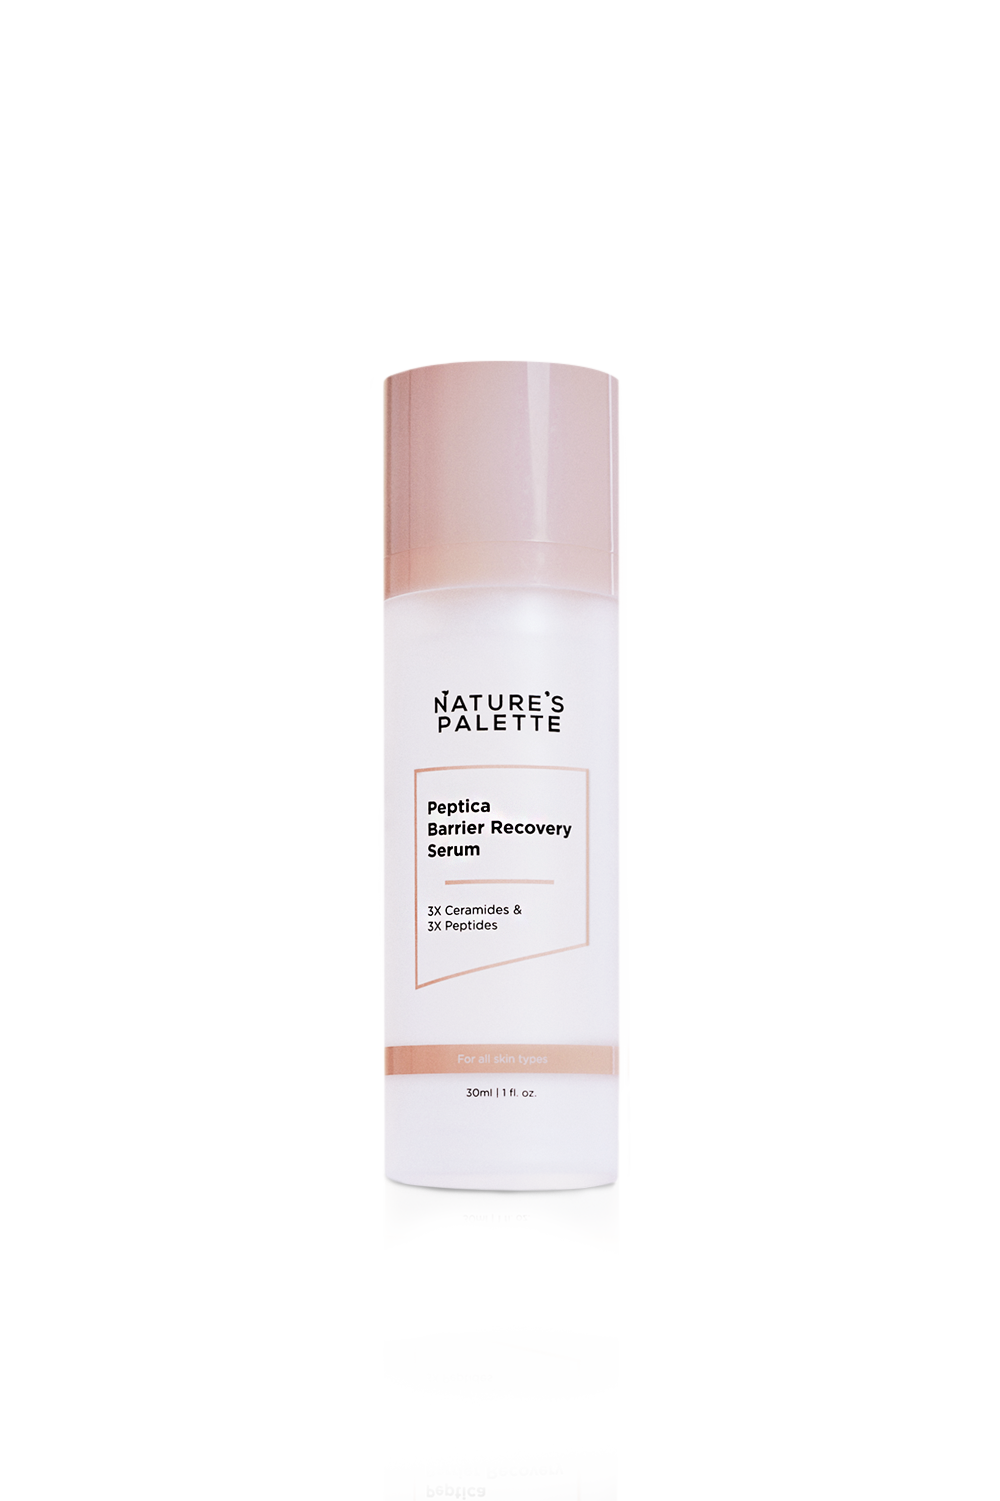 Nature's Palette Peptica Barrier Recovery Serum